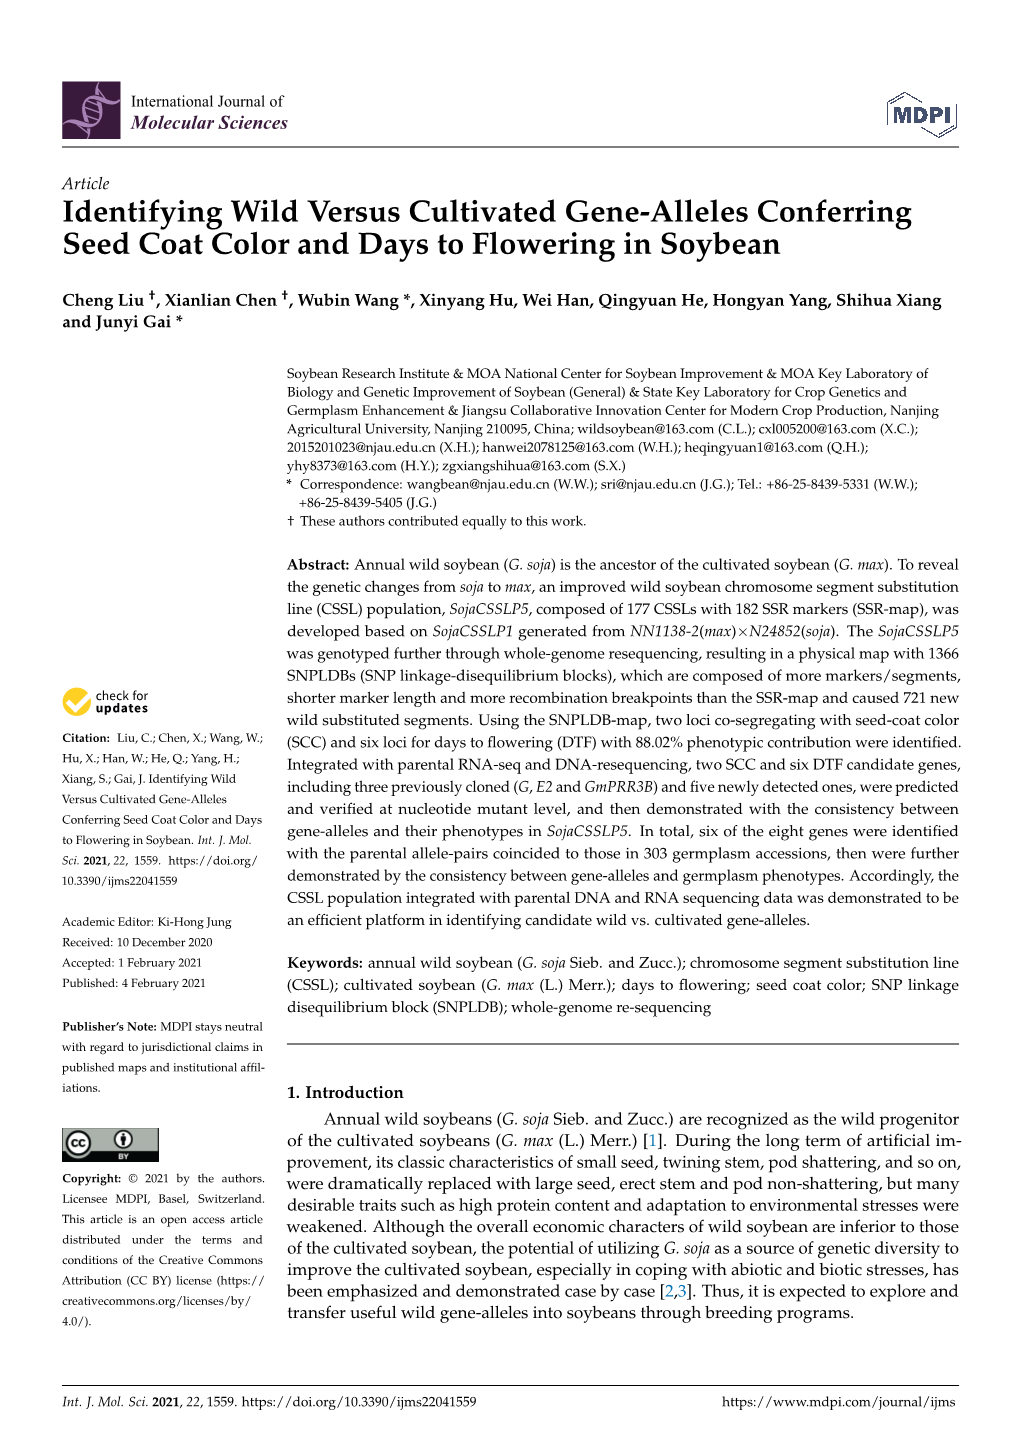 Identifying Wild Versus Cultivated Gene-Alleles Conferring Seed Coat Color and Days to Flowering in Soybean